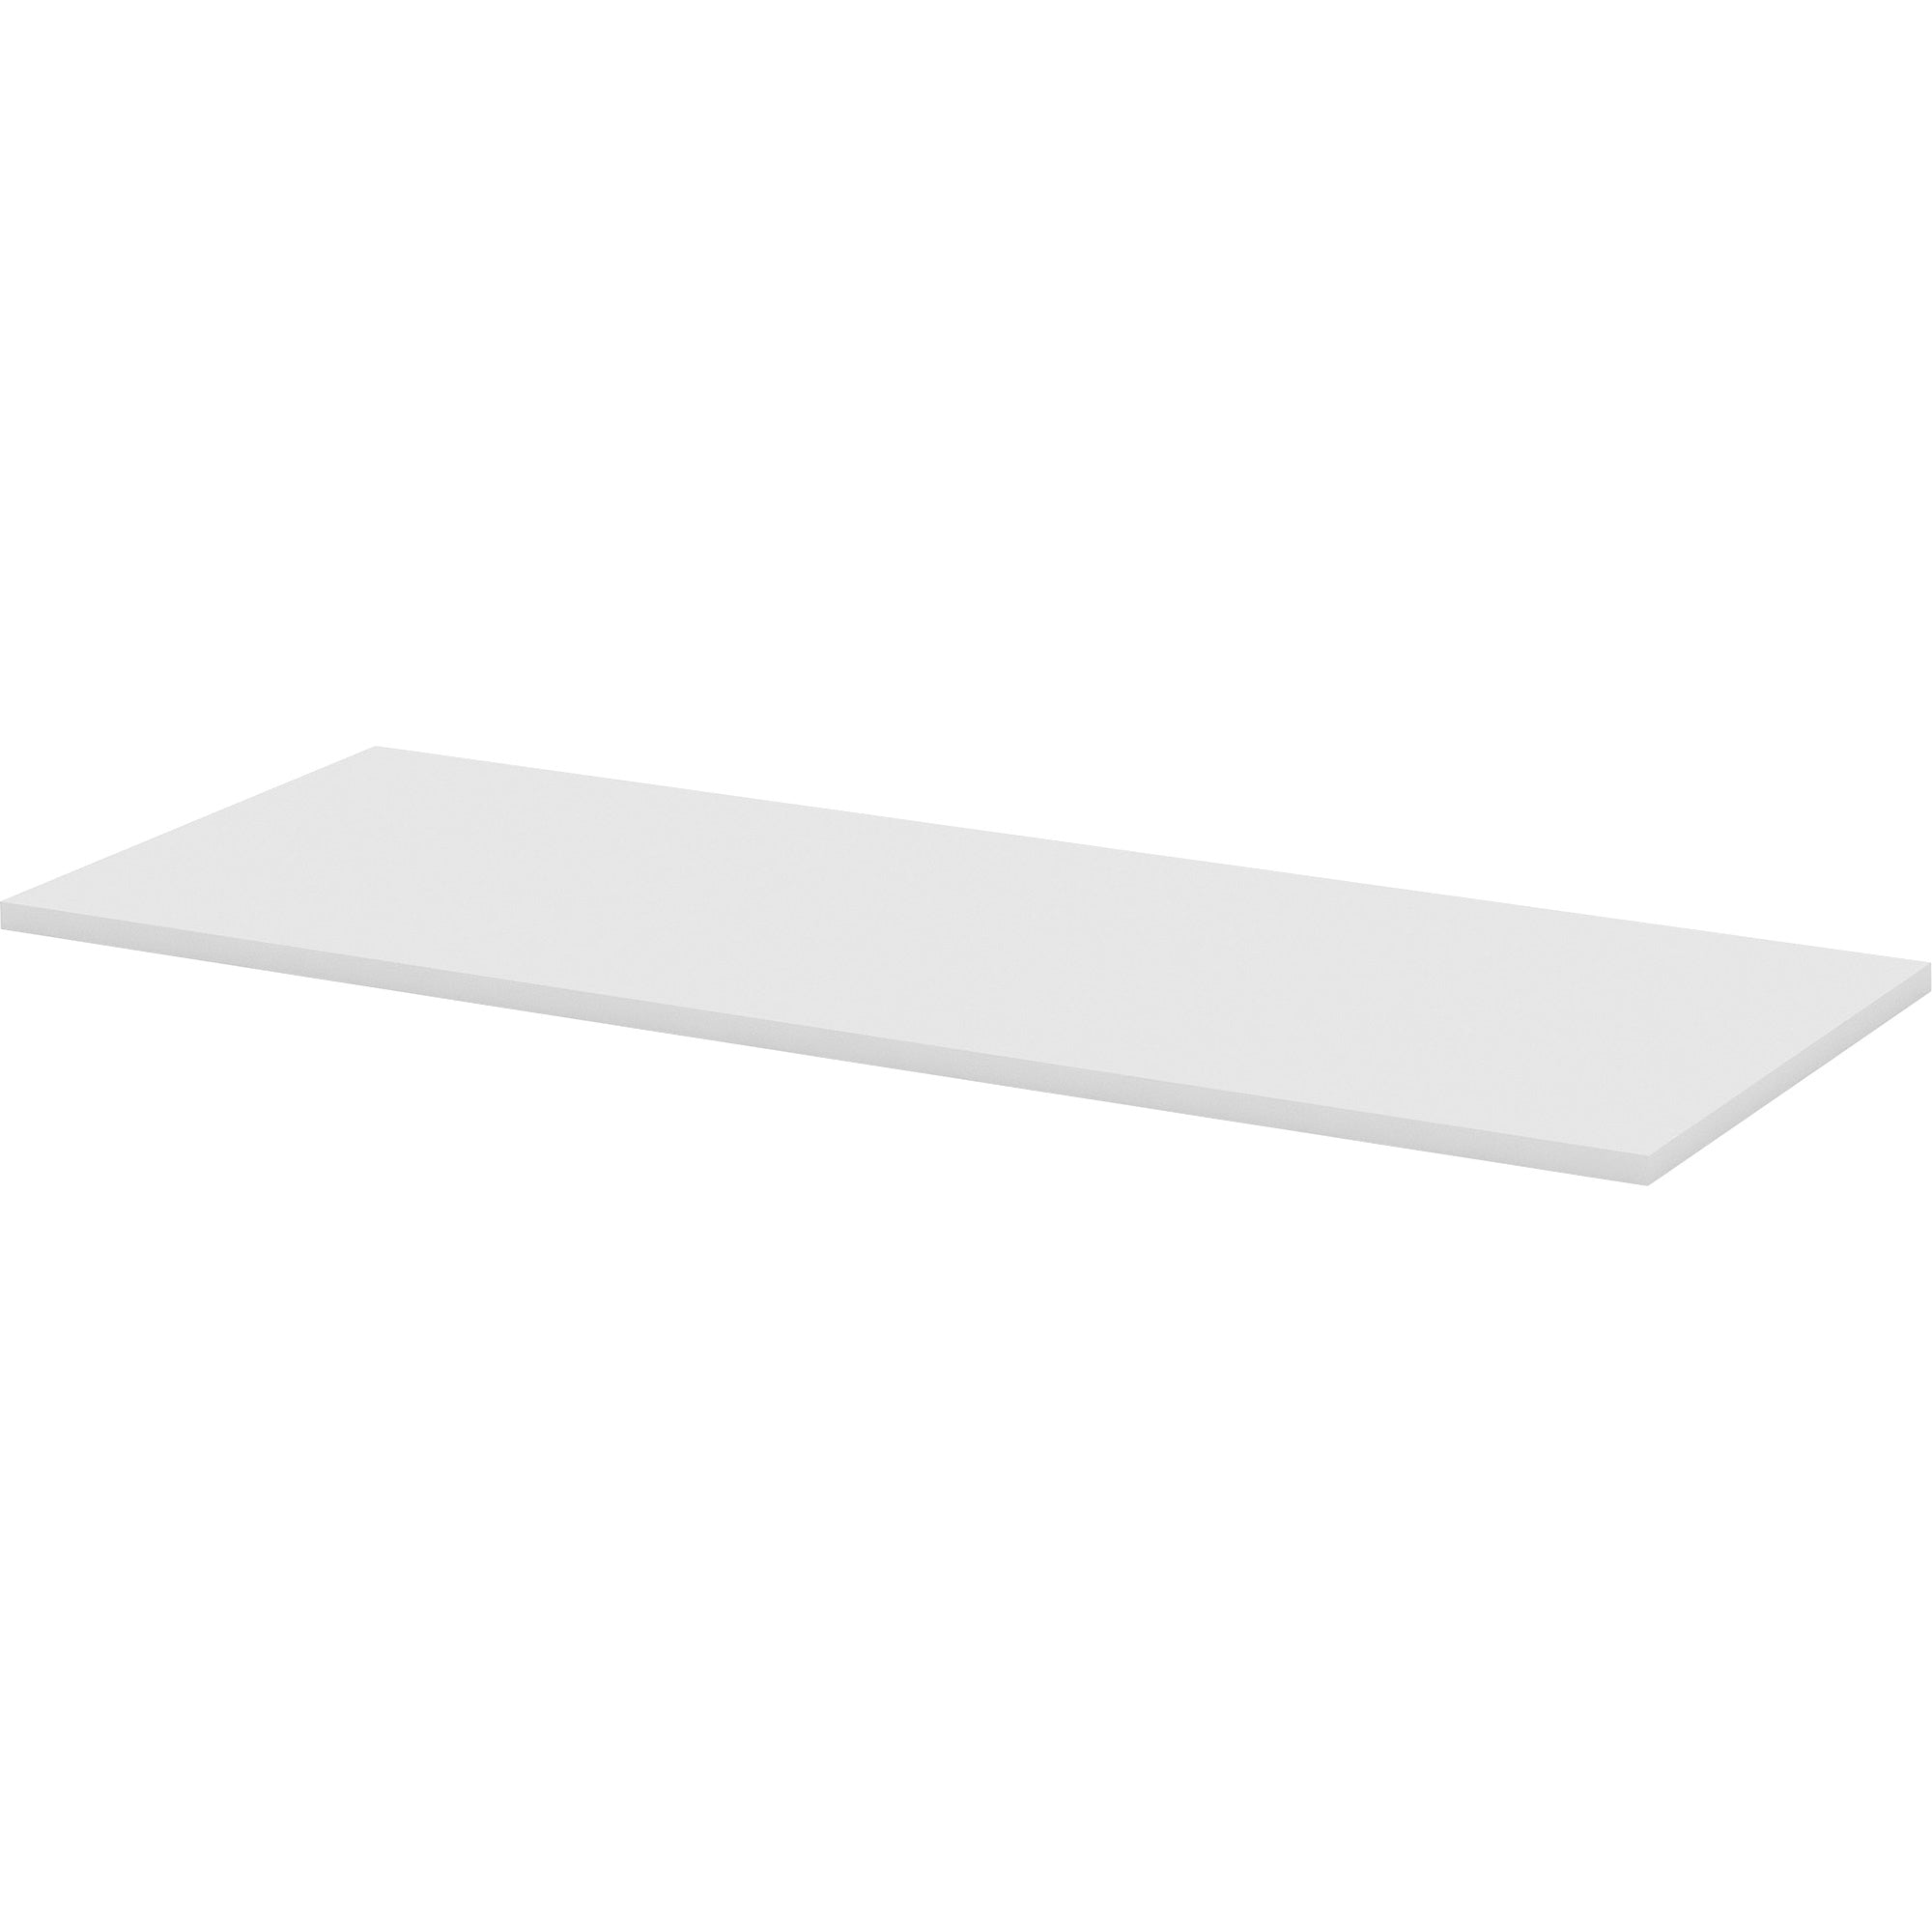 lorell-training-tabletop-for-table-topwhite-rectangle-top-60-table-top-length-x-24-table-top-width-x-1-table-top-thickness-assembly-required-1-each_llr62595 - 1